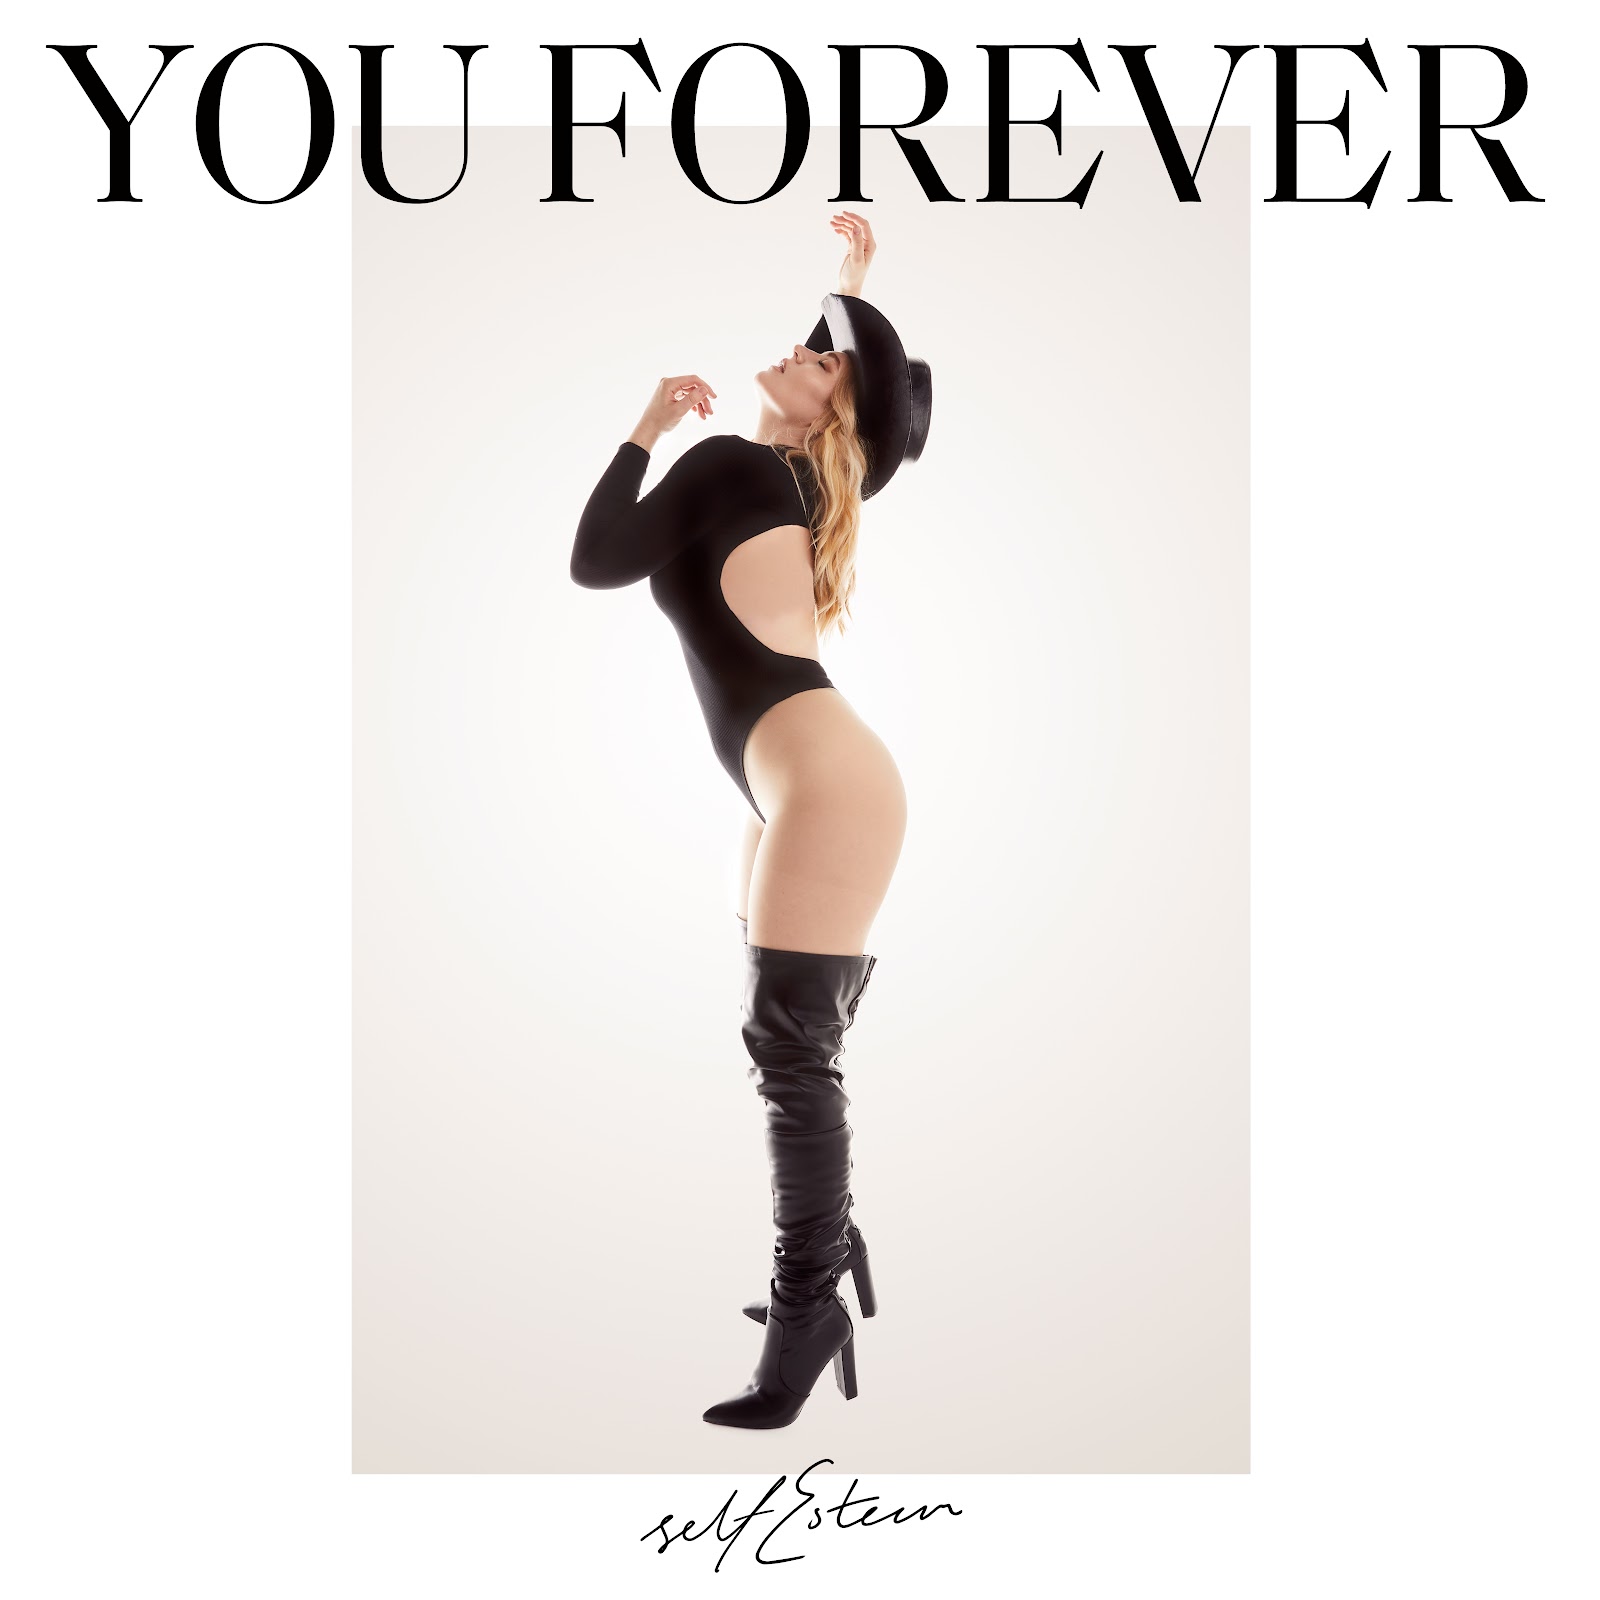 NEWS: Self Esteem shares new edit of empowering track 'You Forever'